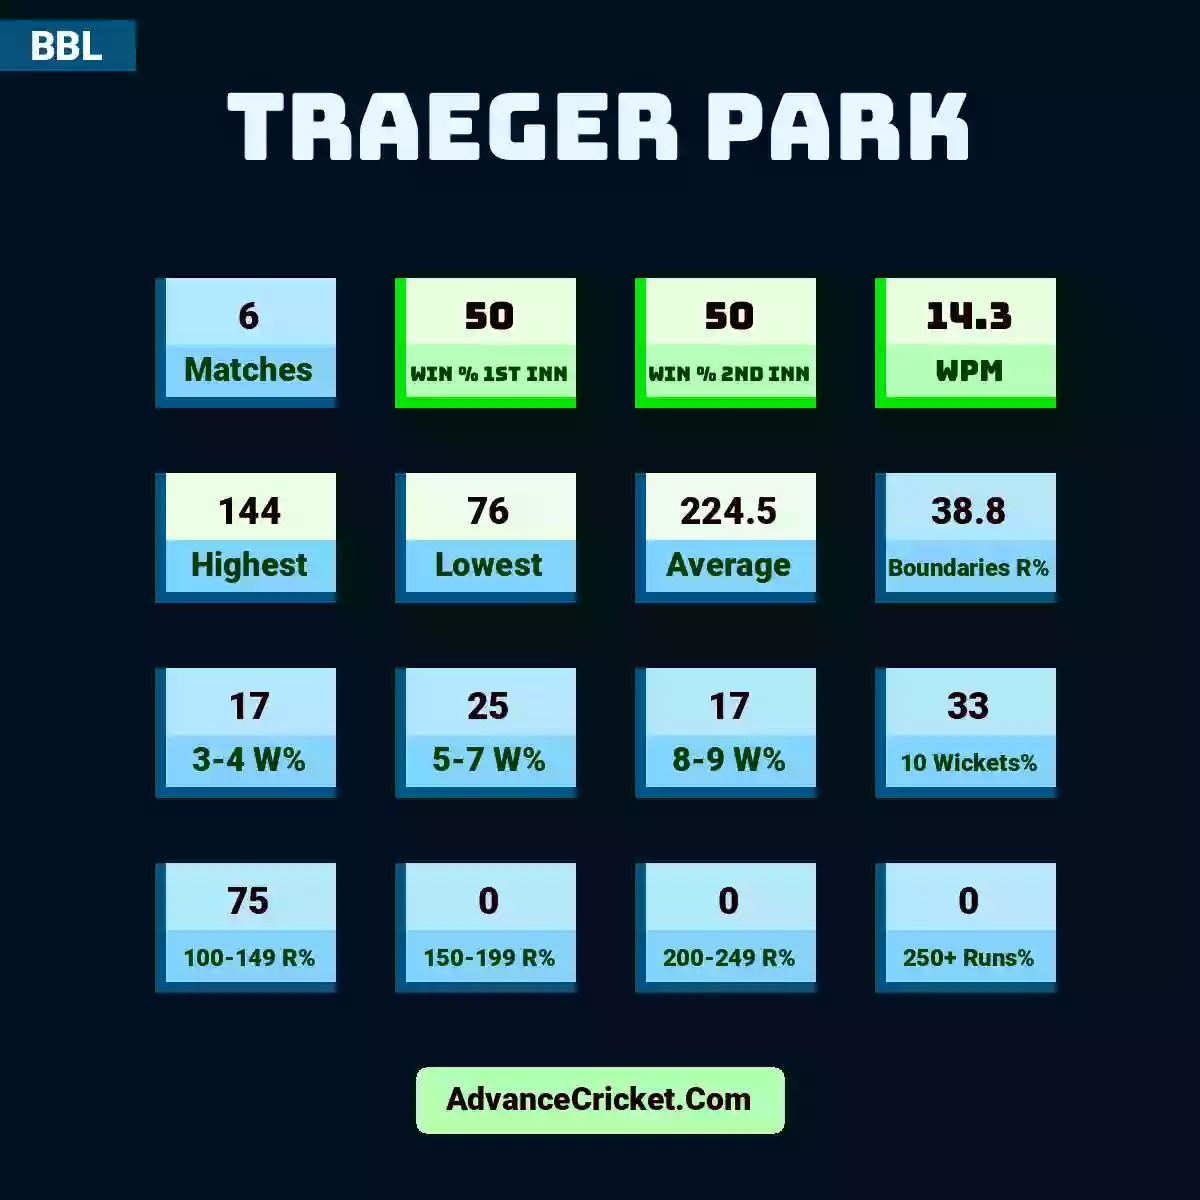 Image showing Traeger Park with Matches: 6, Win % 1st Inn: 50, Win % 2nd Inn: 50, WPM: 14.3, Highest: 144, Lowest: 76, Average: 224.5, Boundaries R%: 38.8, 3-4 W%: 17, 5-7 W%: 25, 8-9 W%: 17, 10 Wickets%: 33, 100-149 R%: 75, 150-199 R%: 0, 200-249 R%: 0, 250+ Runs%: 0.